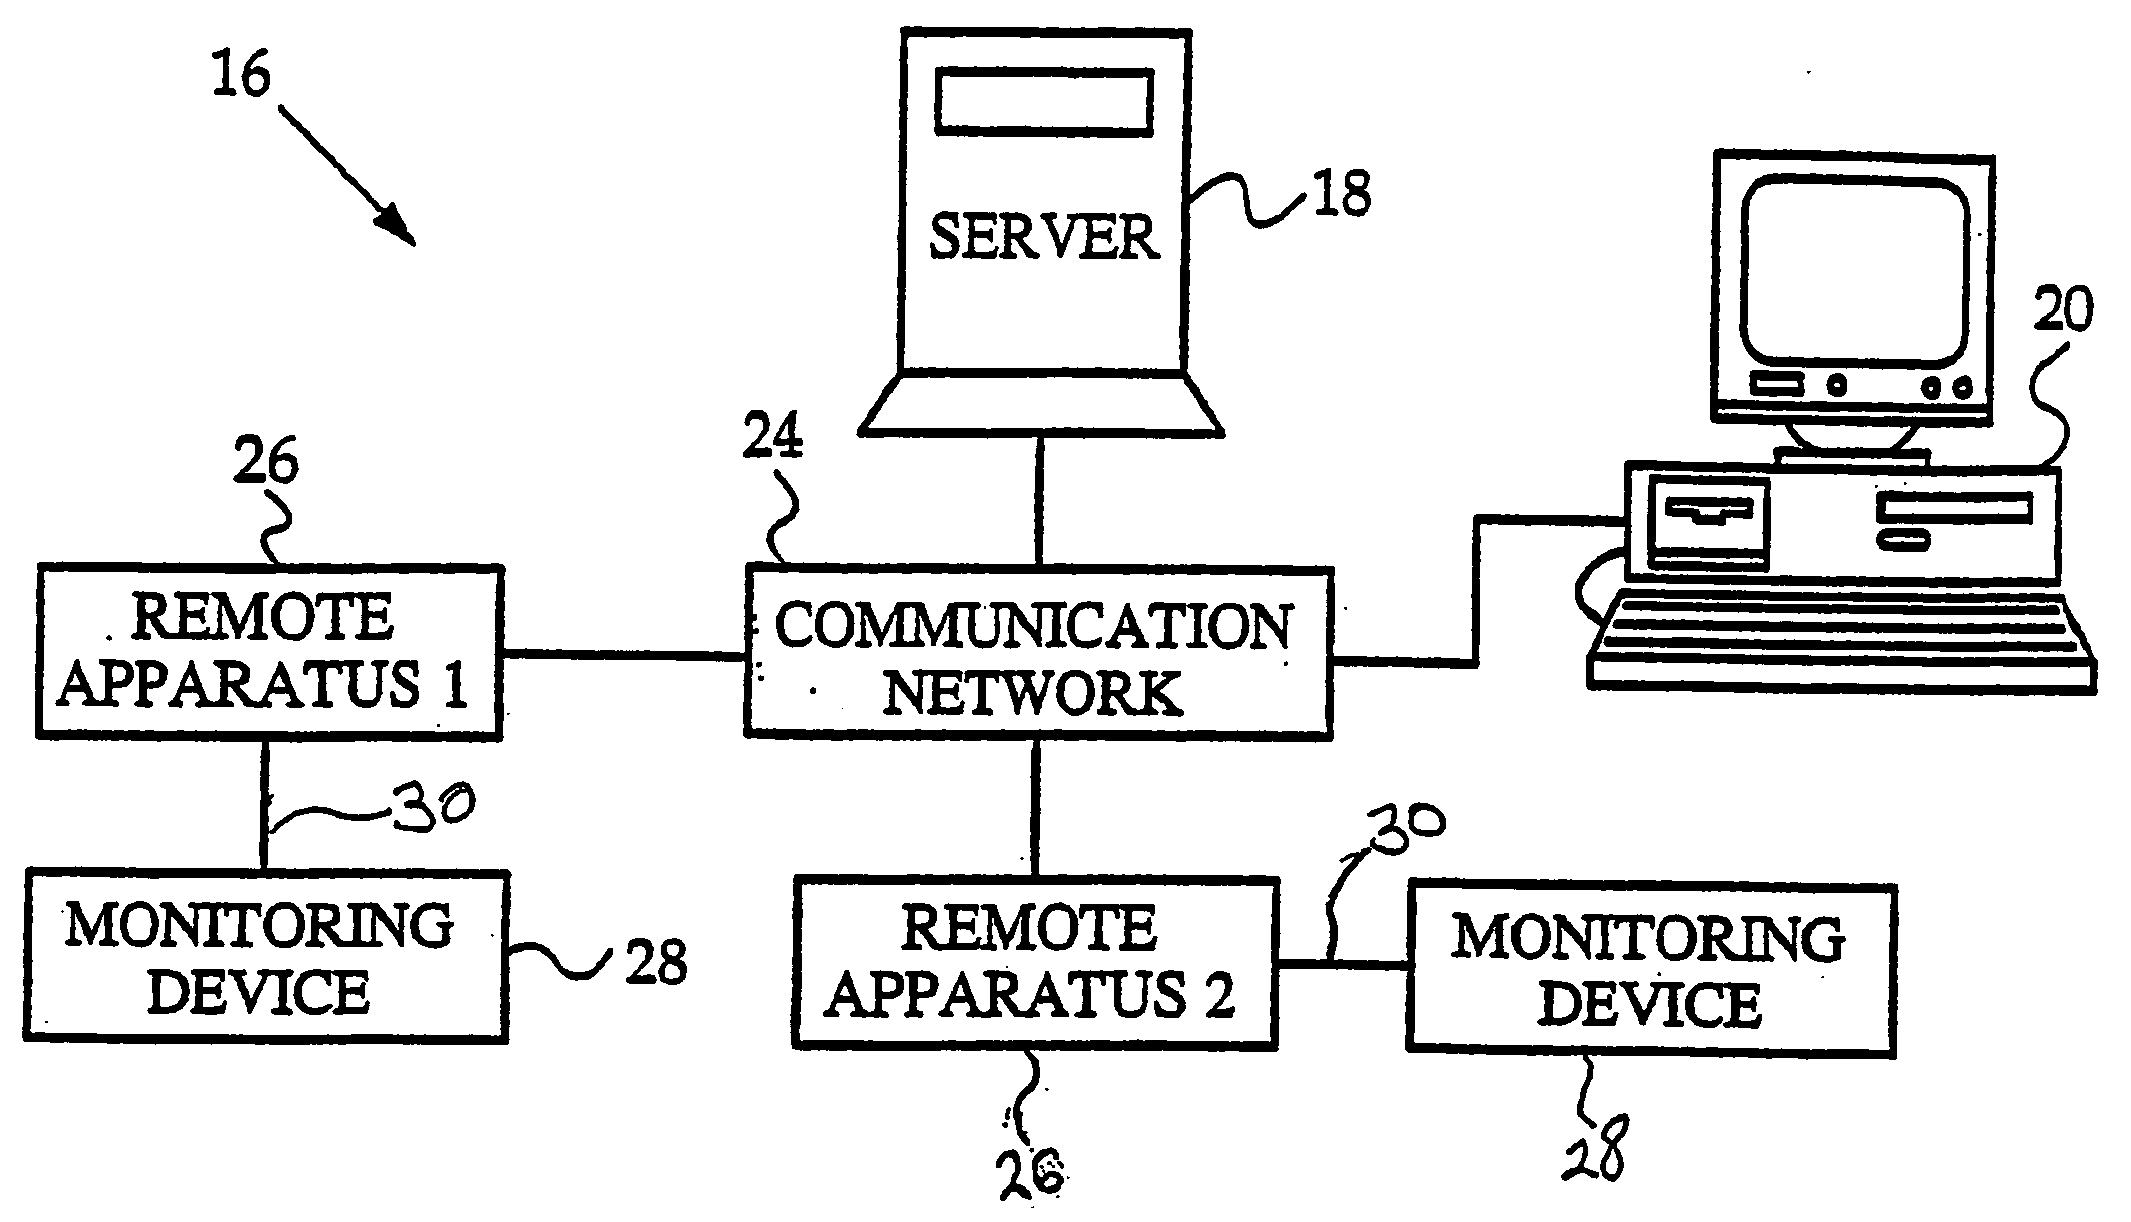 Remote health monitoring apparatus using scripted communications